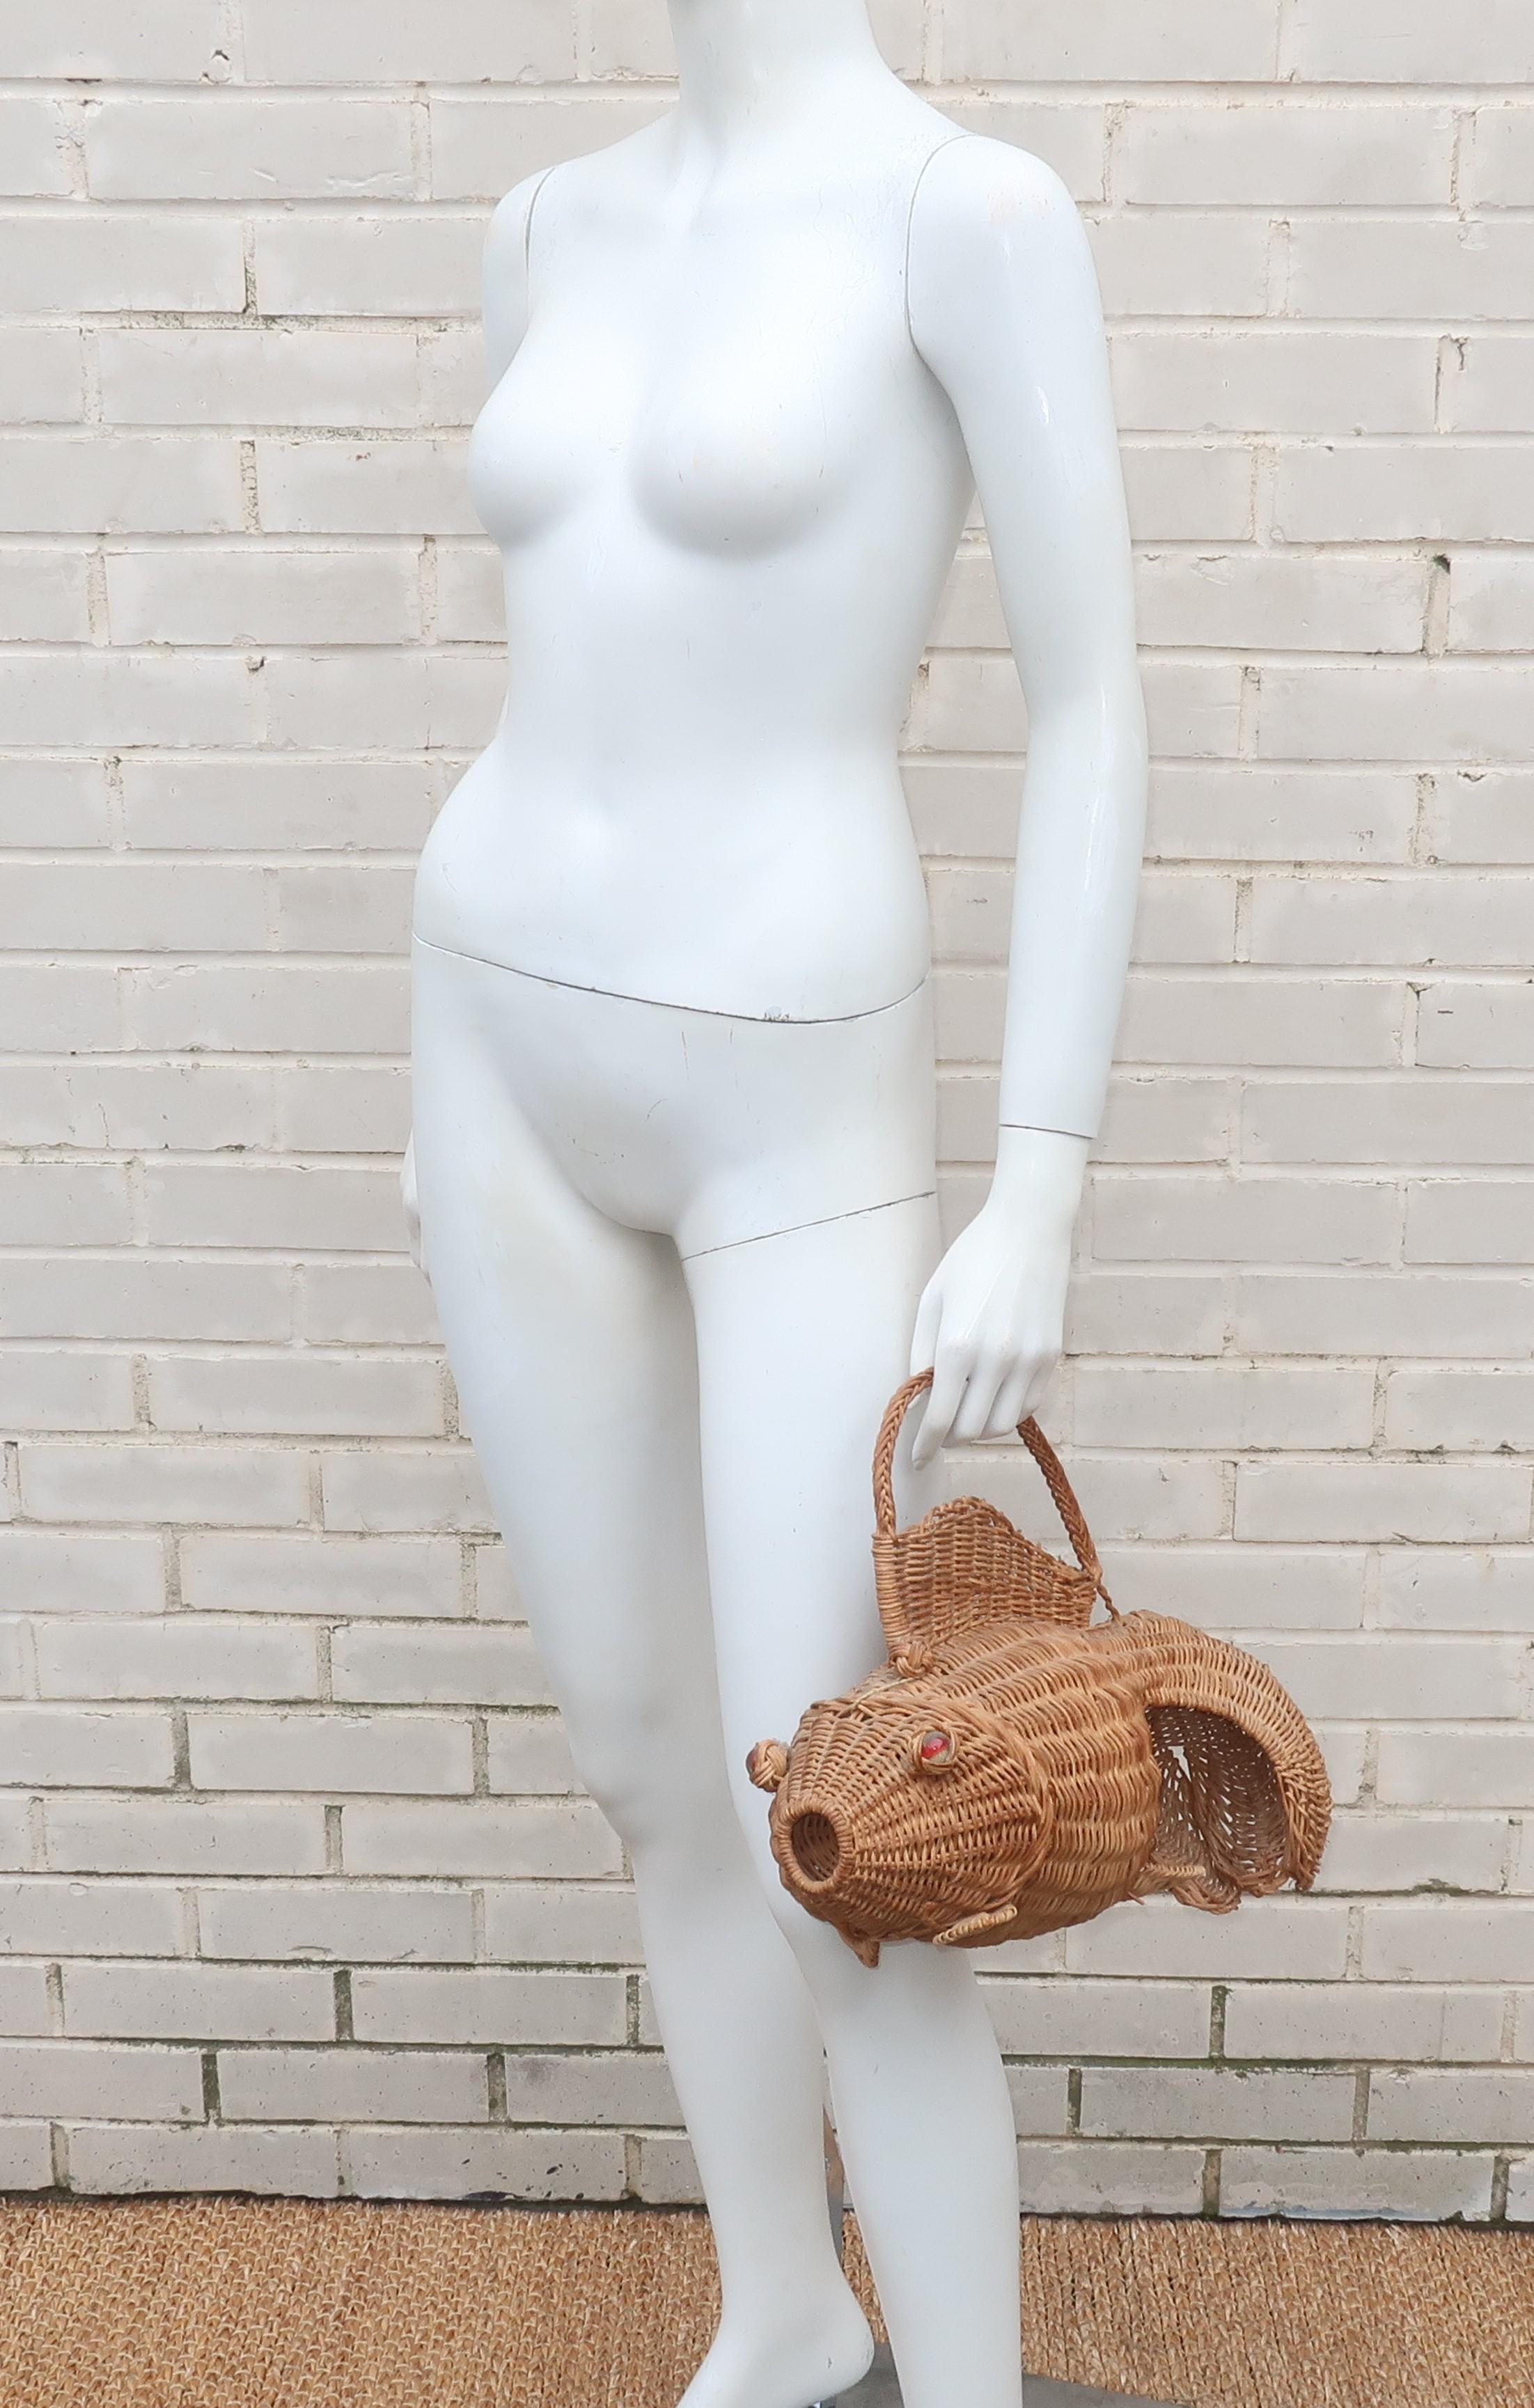 Personality plus!  This 1950's novelty goldfish wicker handbag is a great conversation piece and perfect to pair with sundresses and straw hats.  His top fin functions as a handle and he opens at the back of the head with a frog style closure to